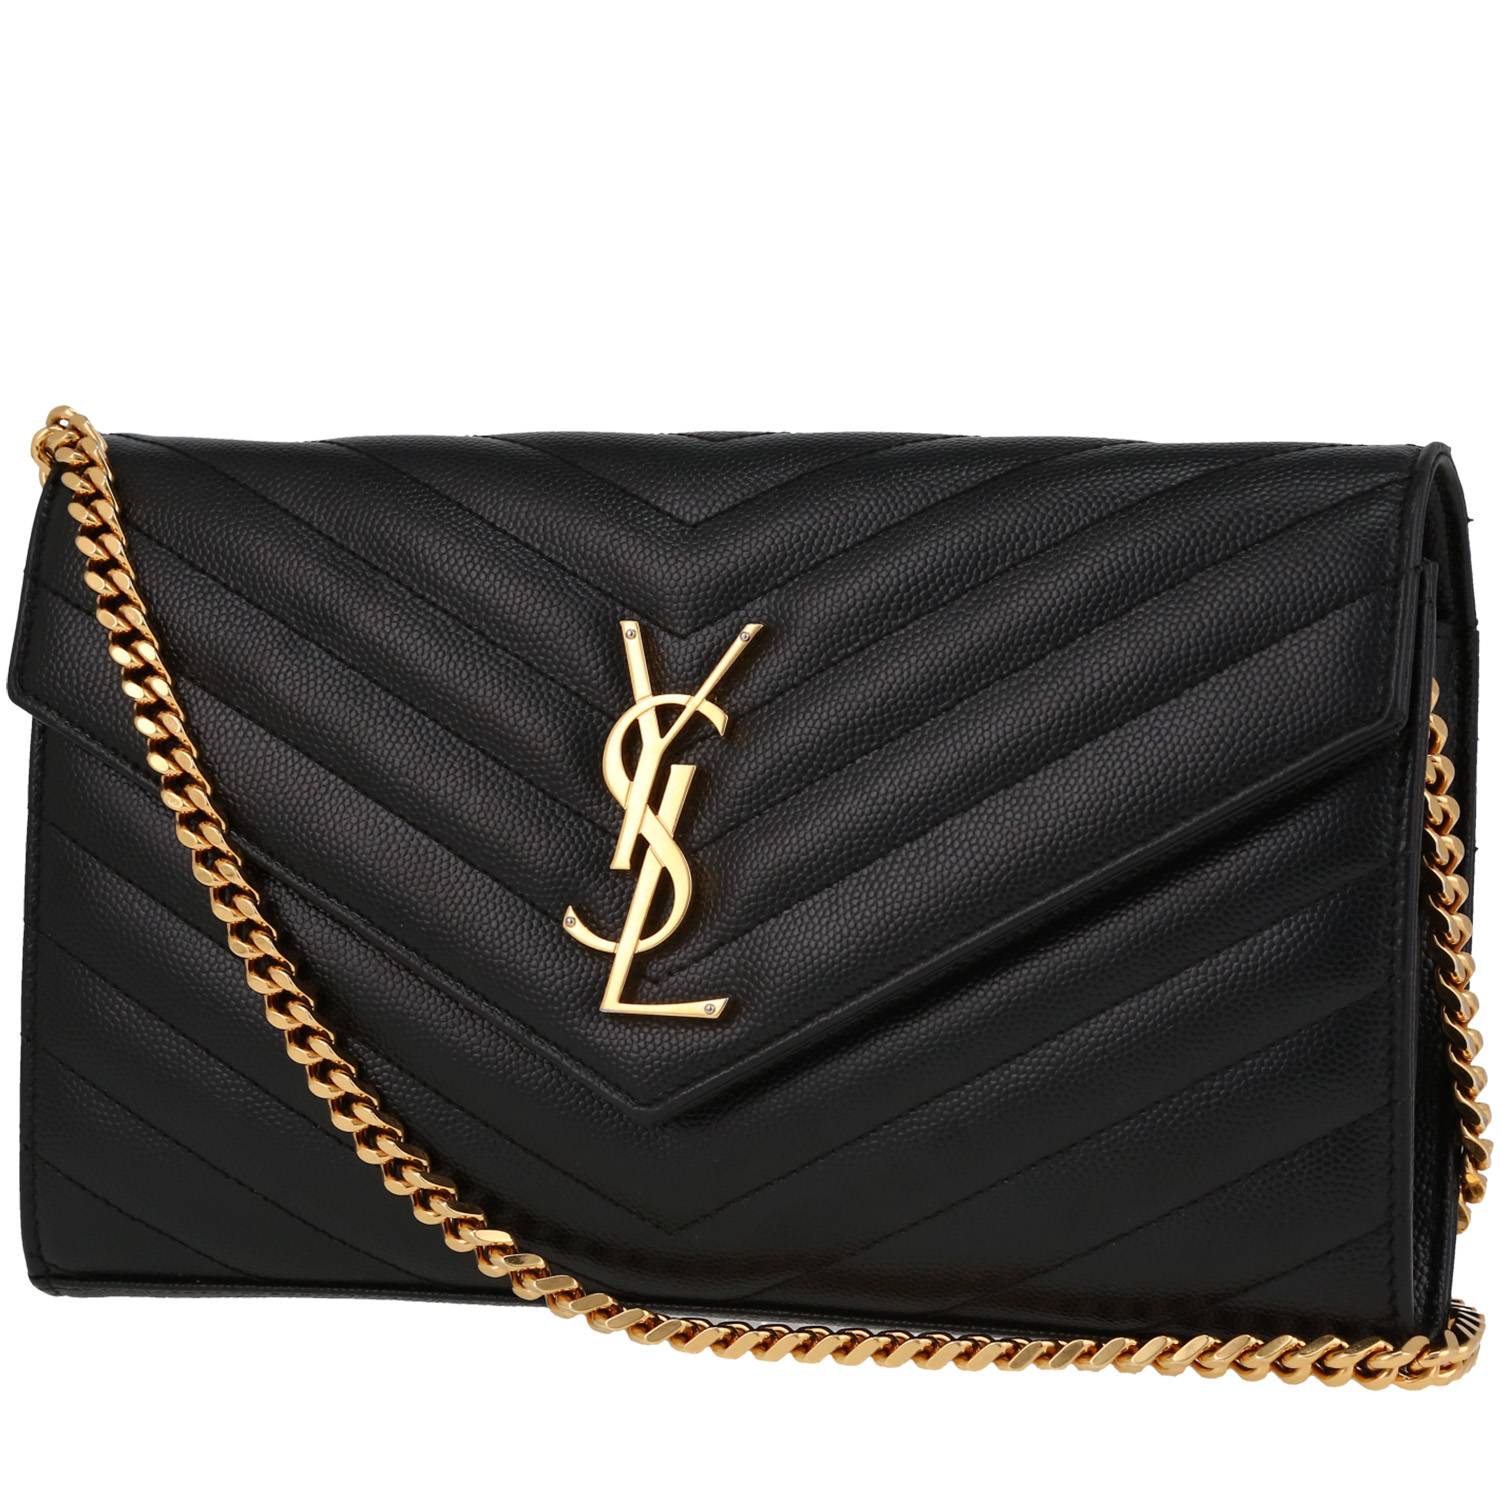 Buy the YSL Beaute Clutch Purse | GoodwillFinds